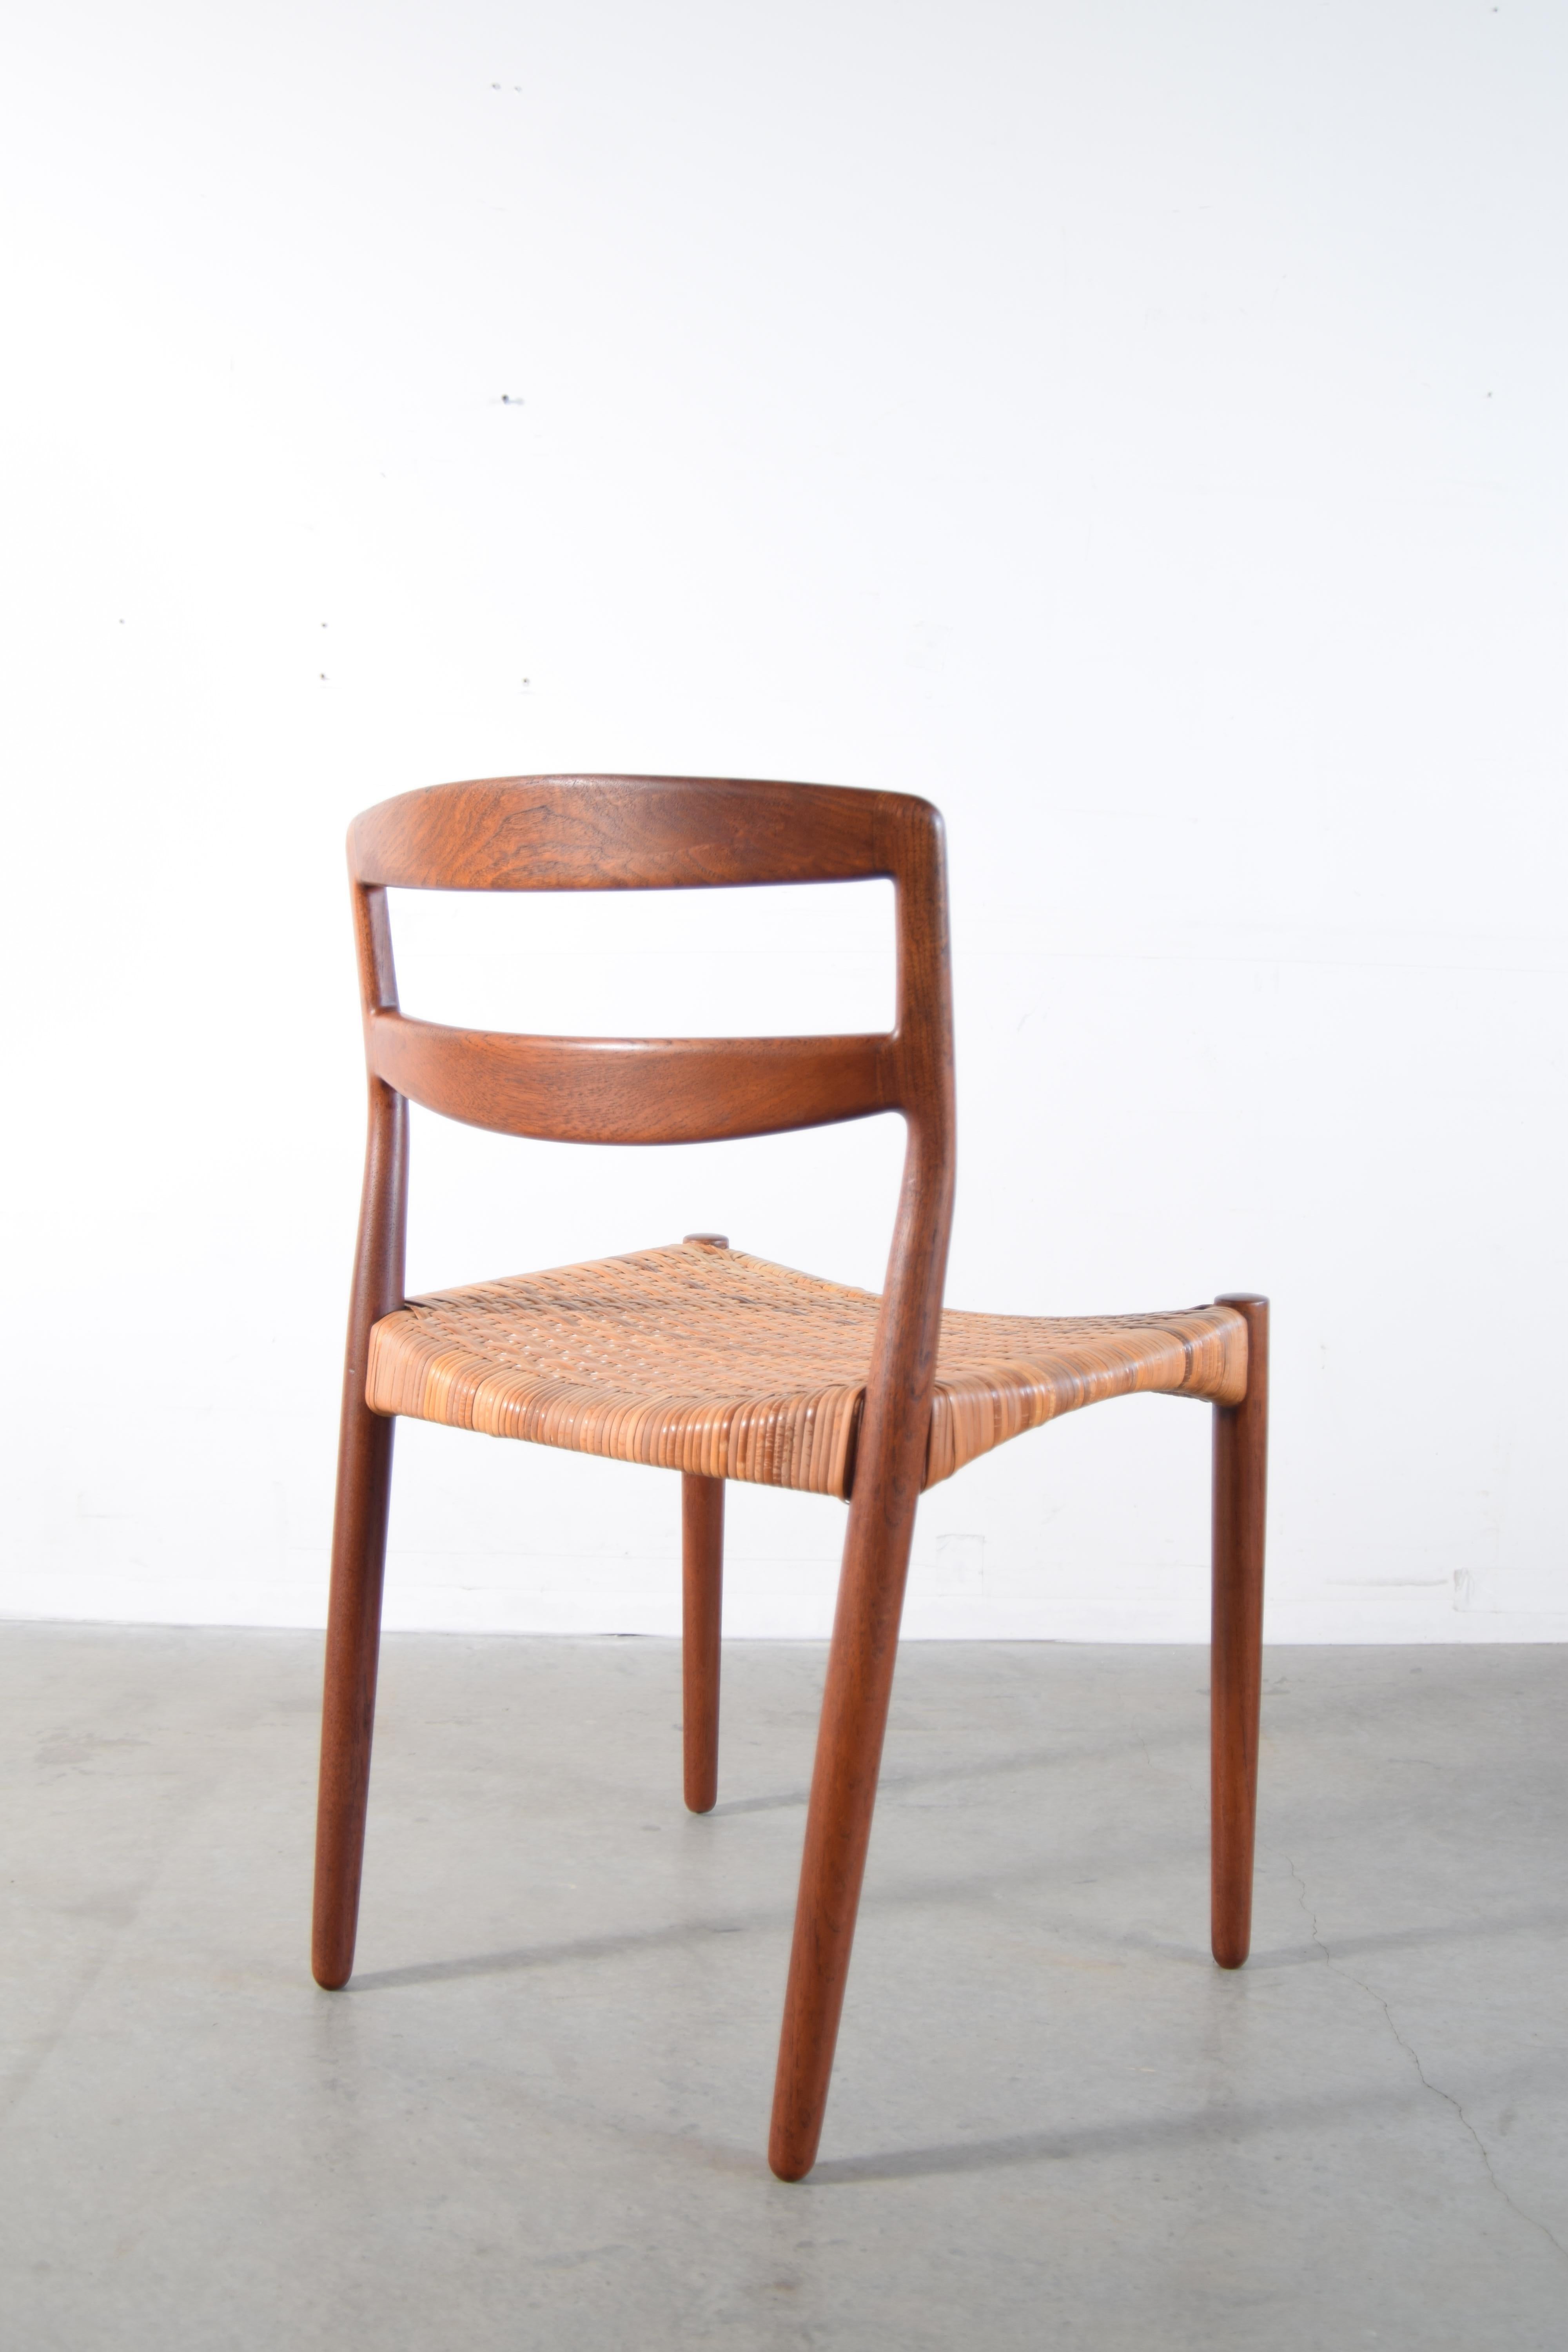 Pair of Ejner Larsen and Aksel Bender Madsen Teak and Cane Chairs For Sale 6